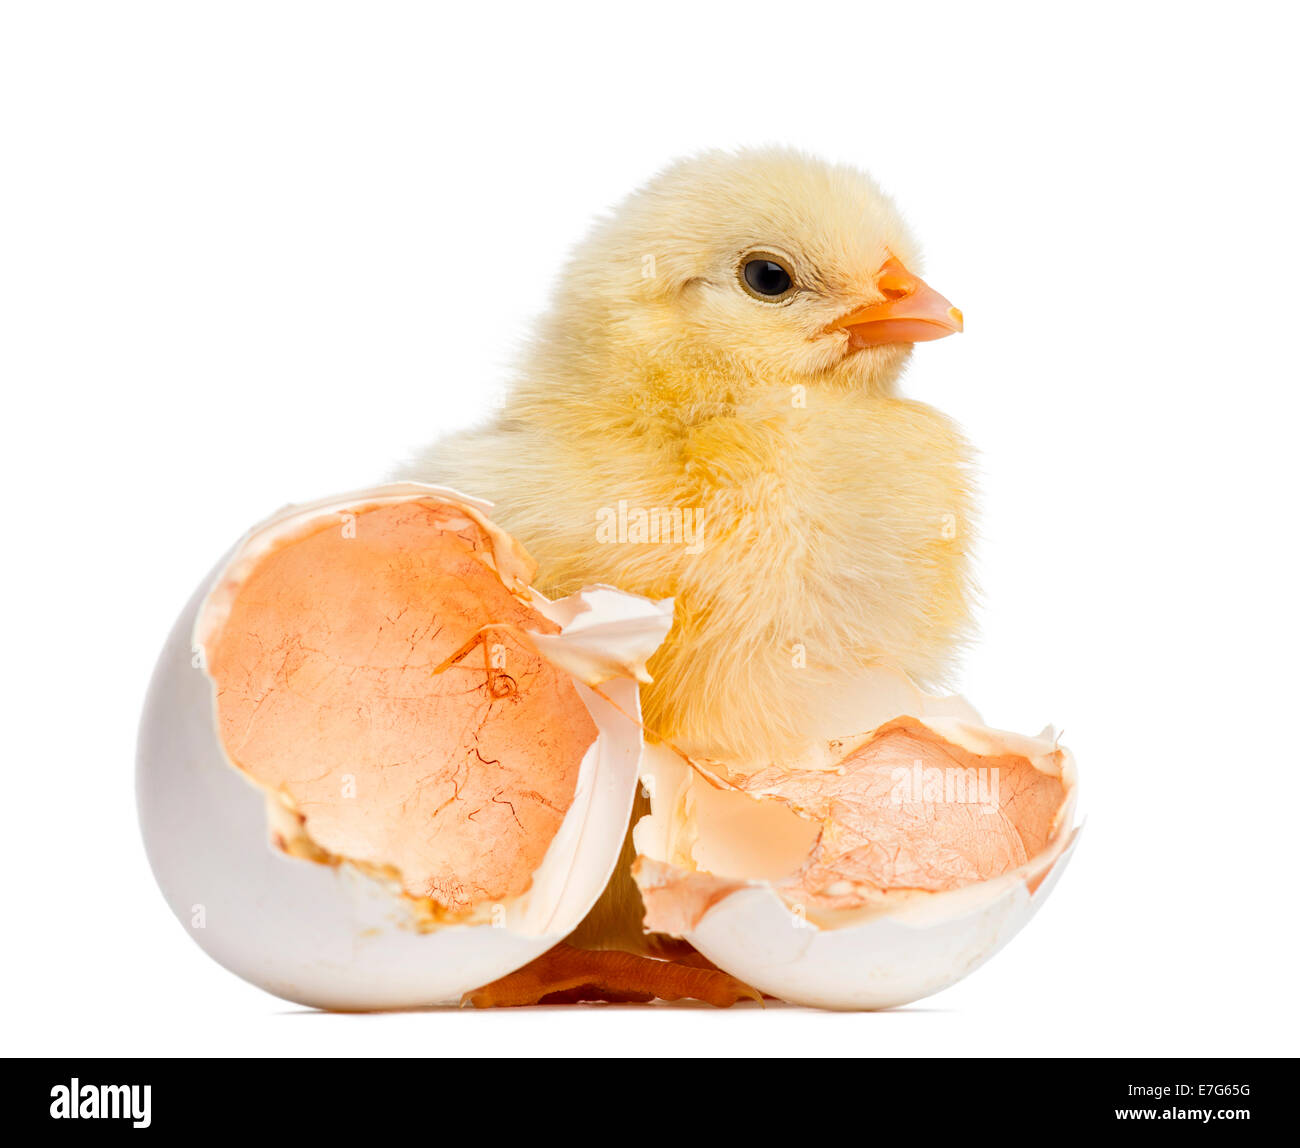 Chick standing next to its egg (2 days old) against white background Stock Photo